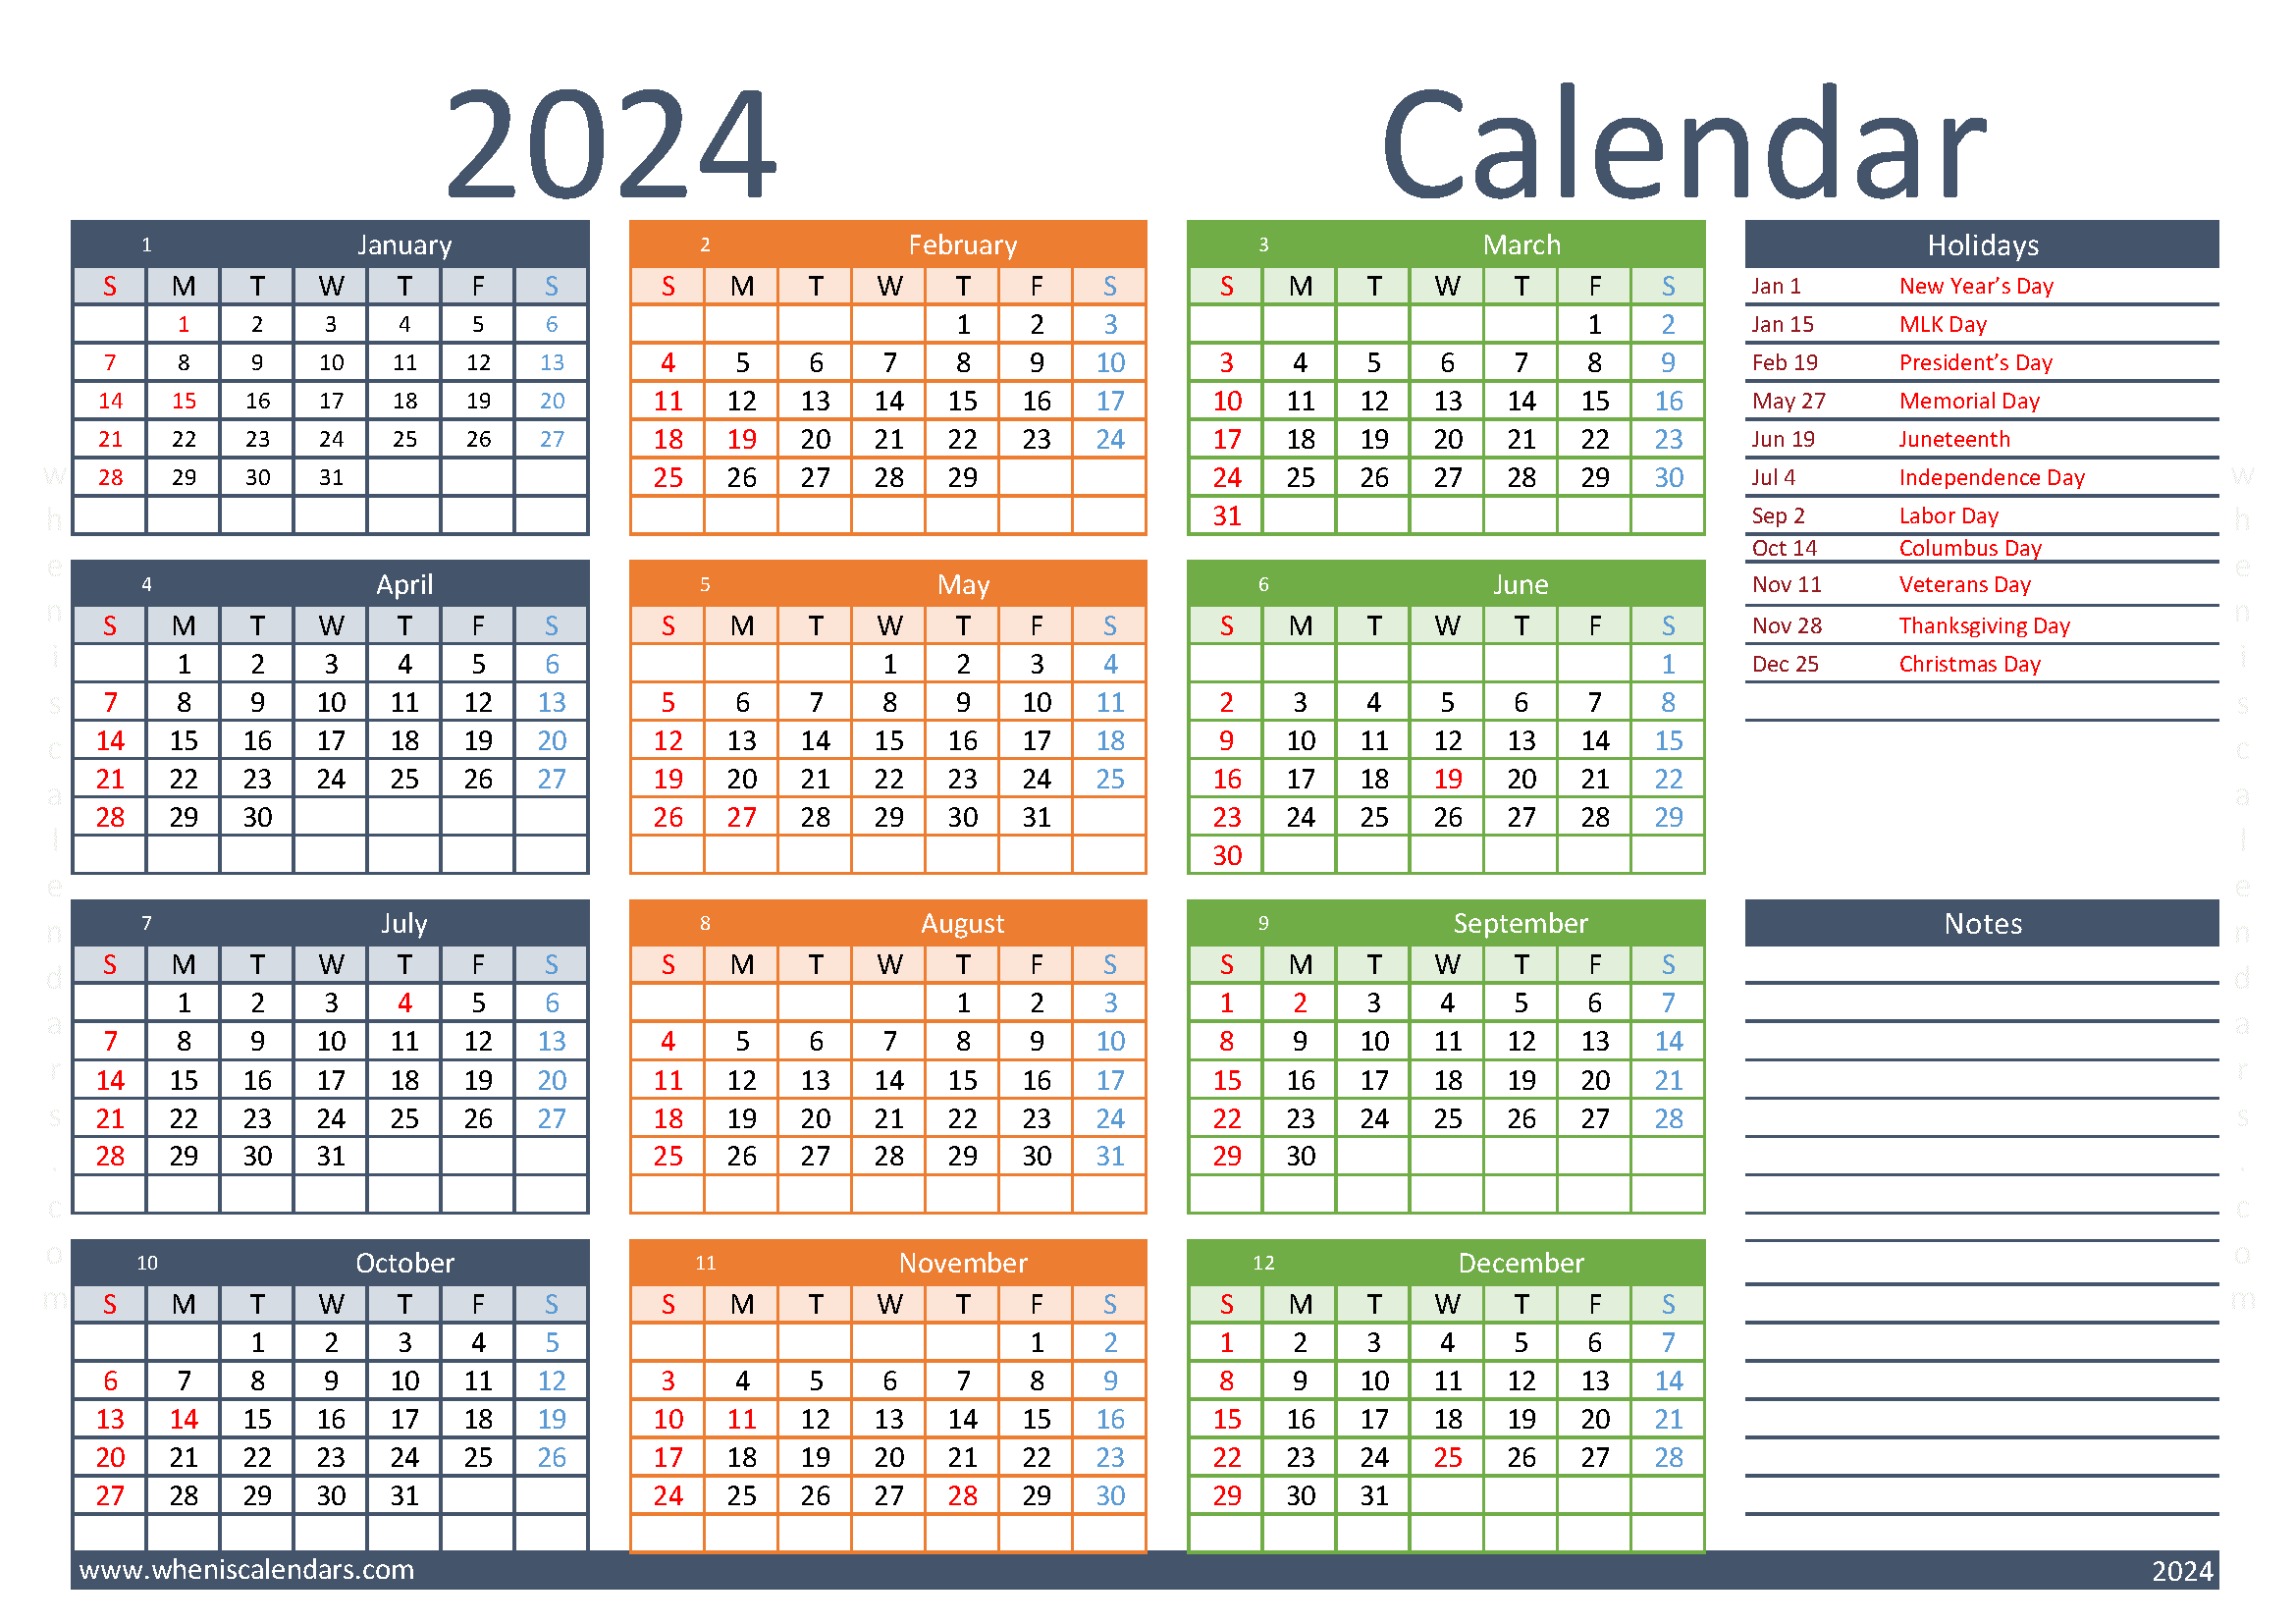 free printable Calendar 2024 with Holidays A4 in horizontal landscape